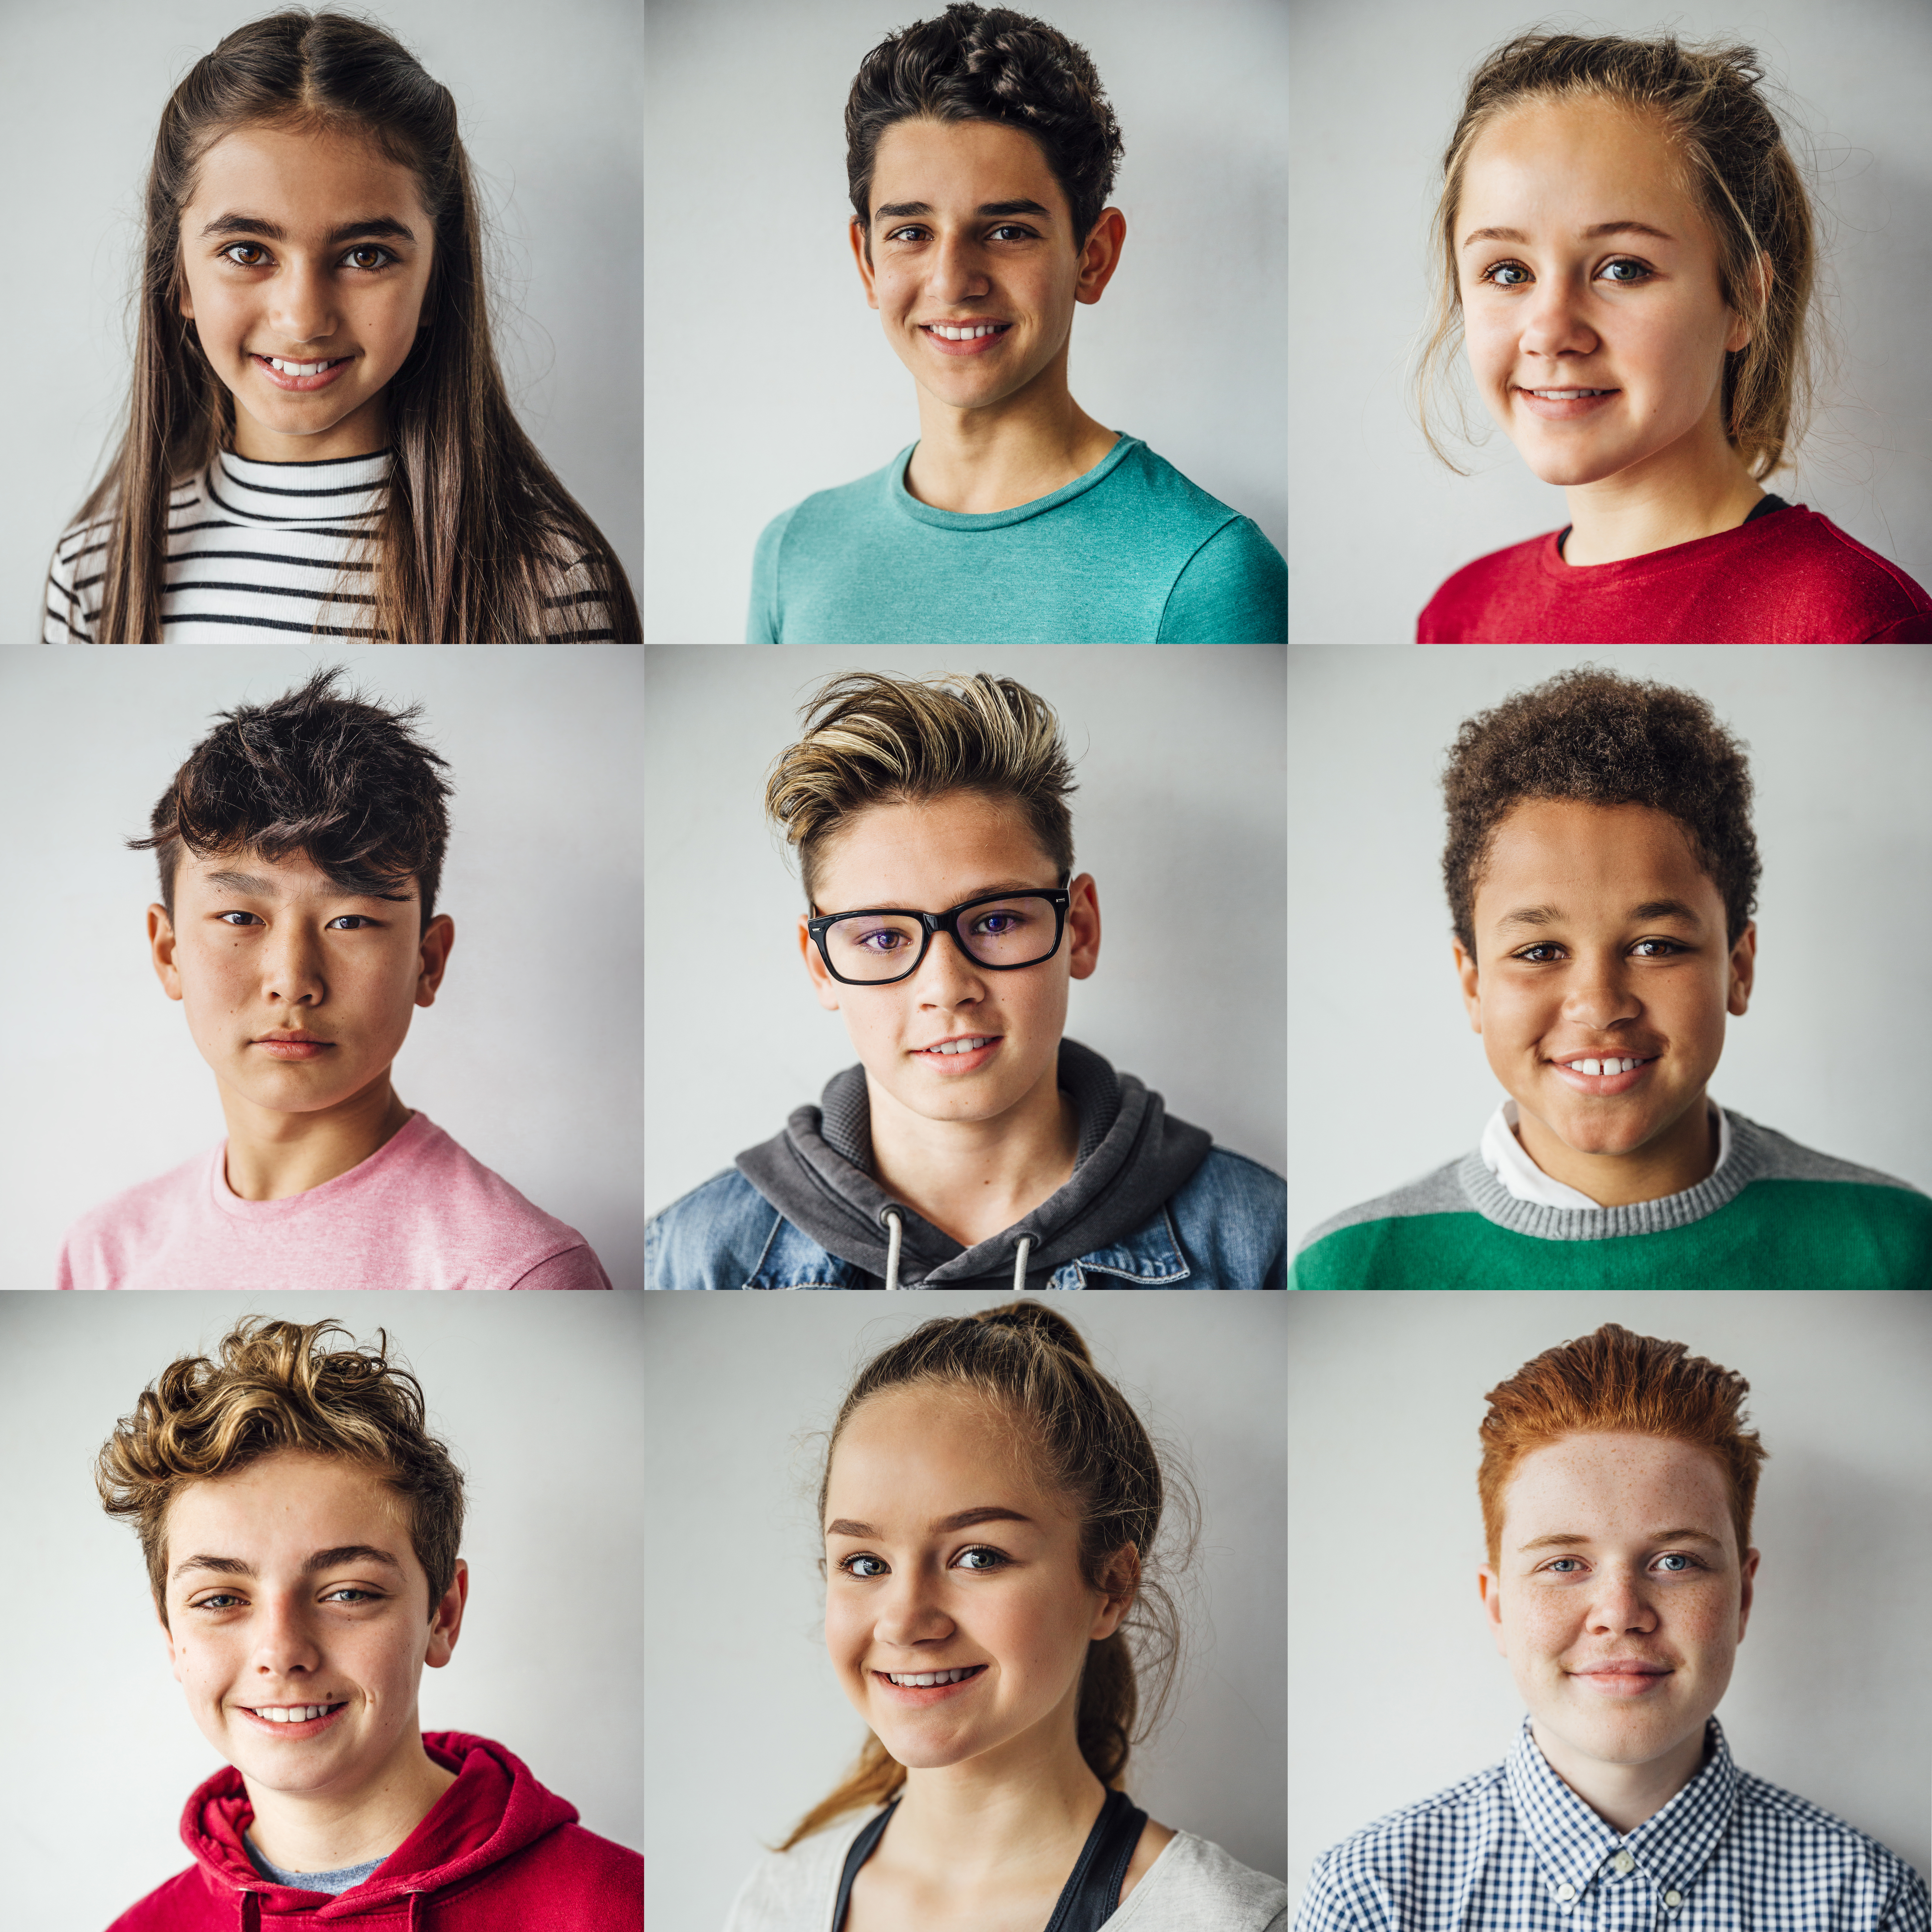 A group of headshots of young children/youths. 